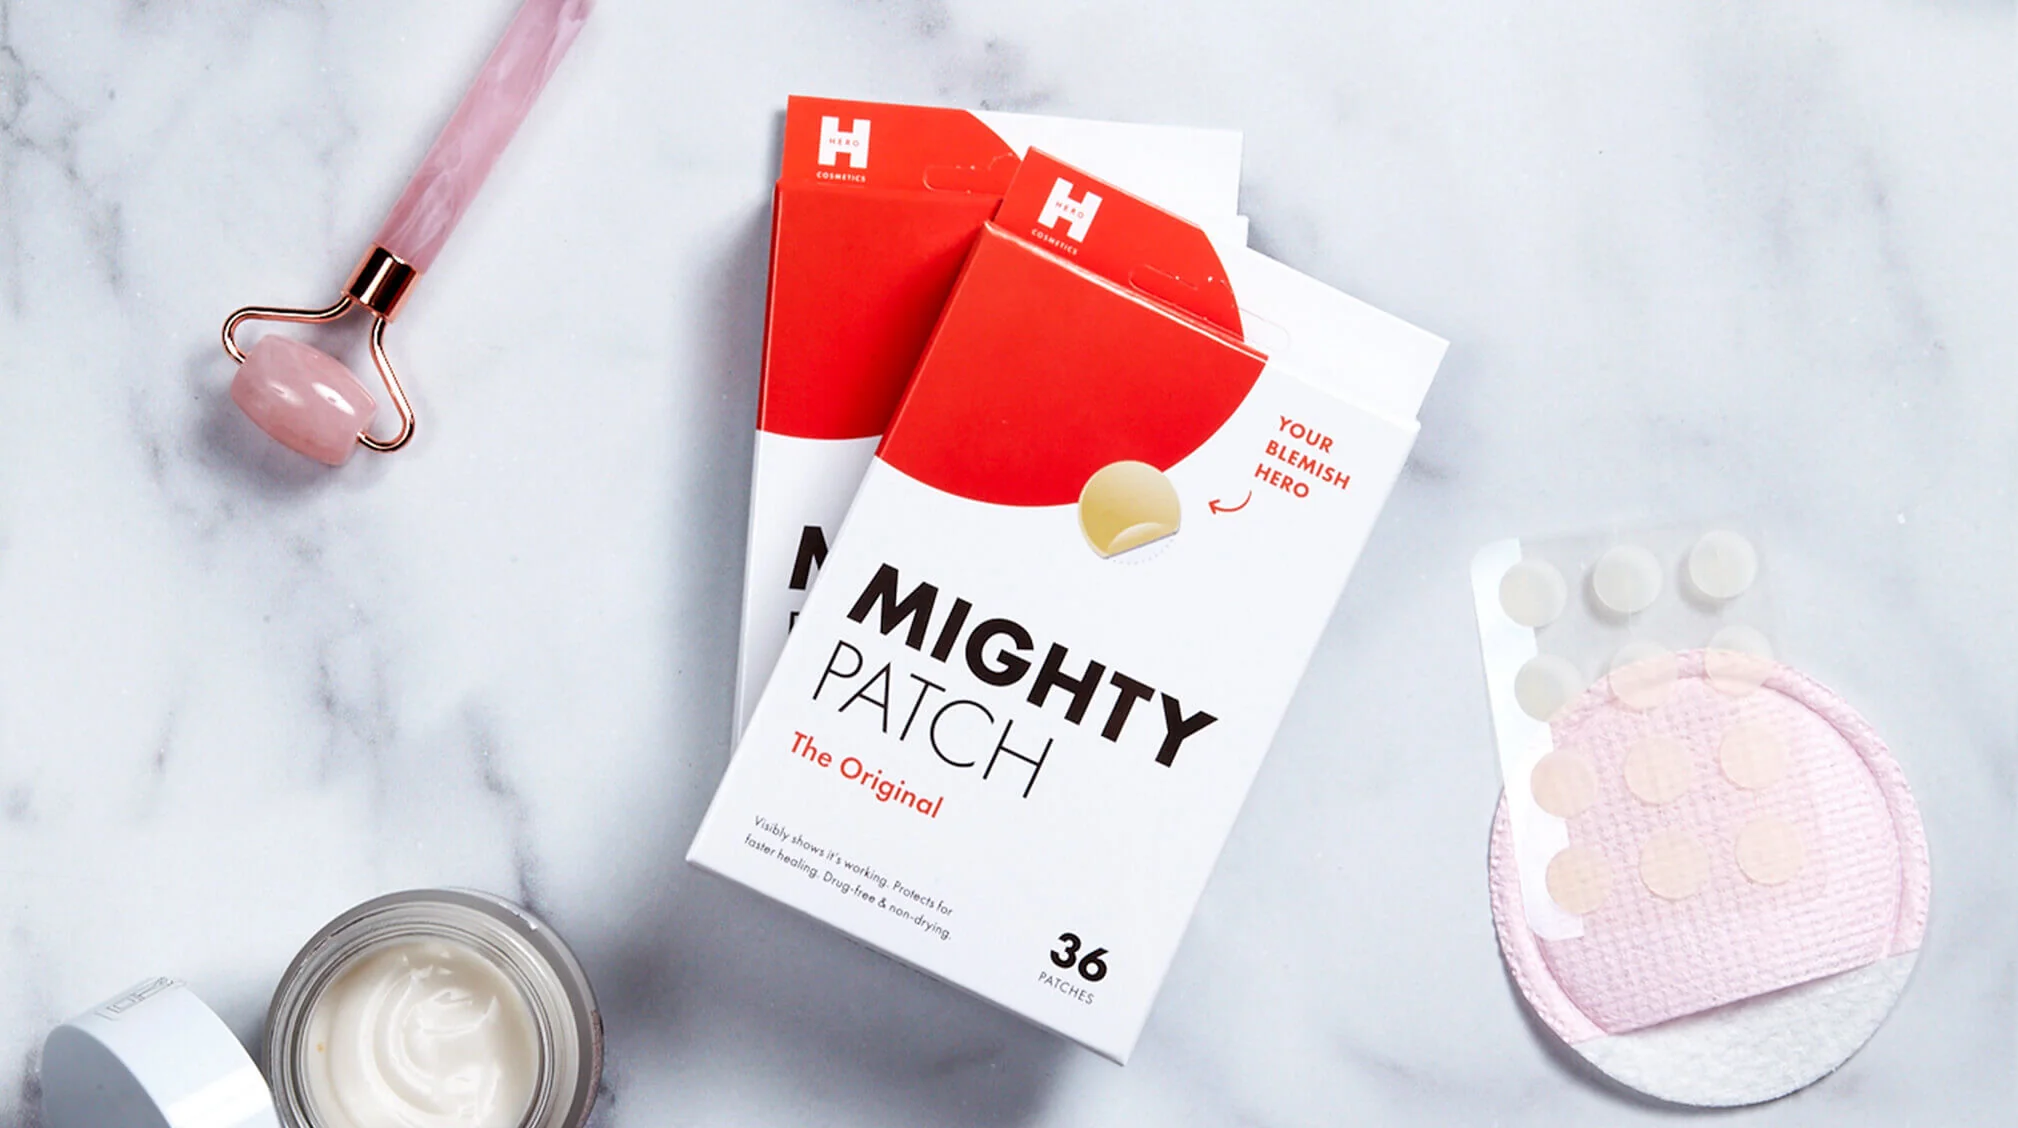 Mighty Patch image